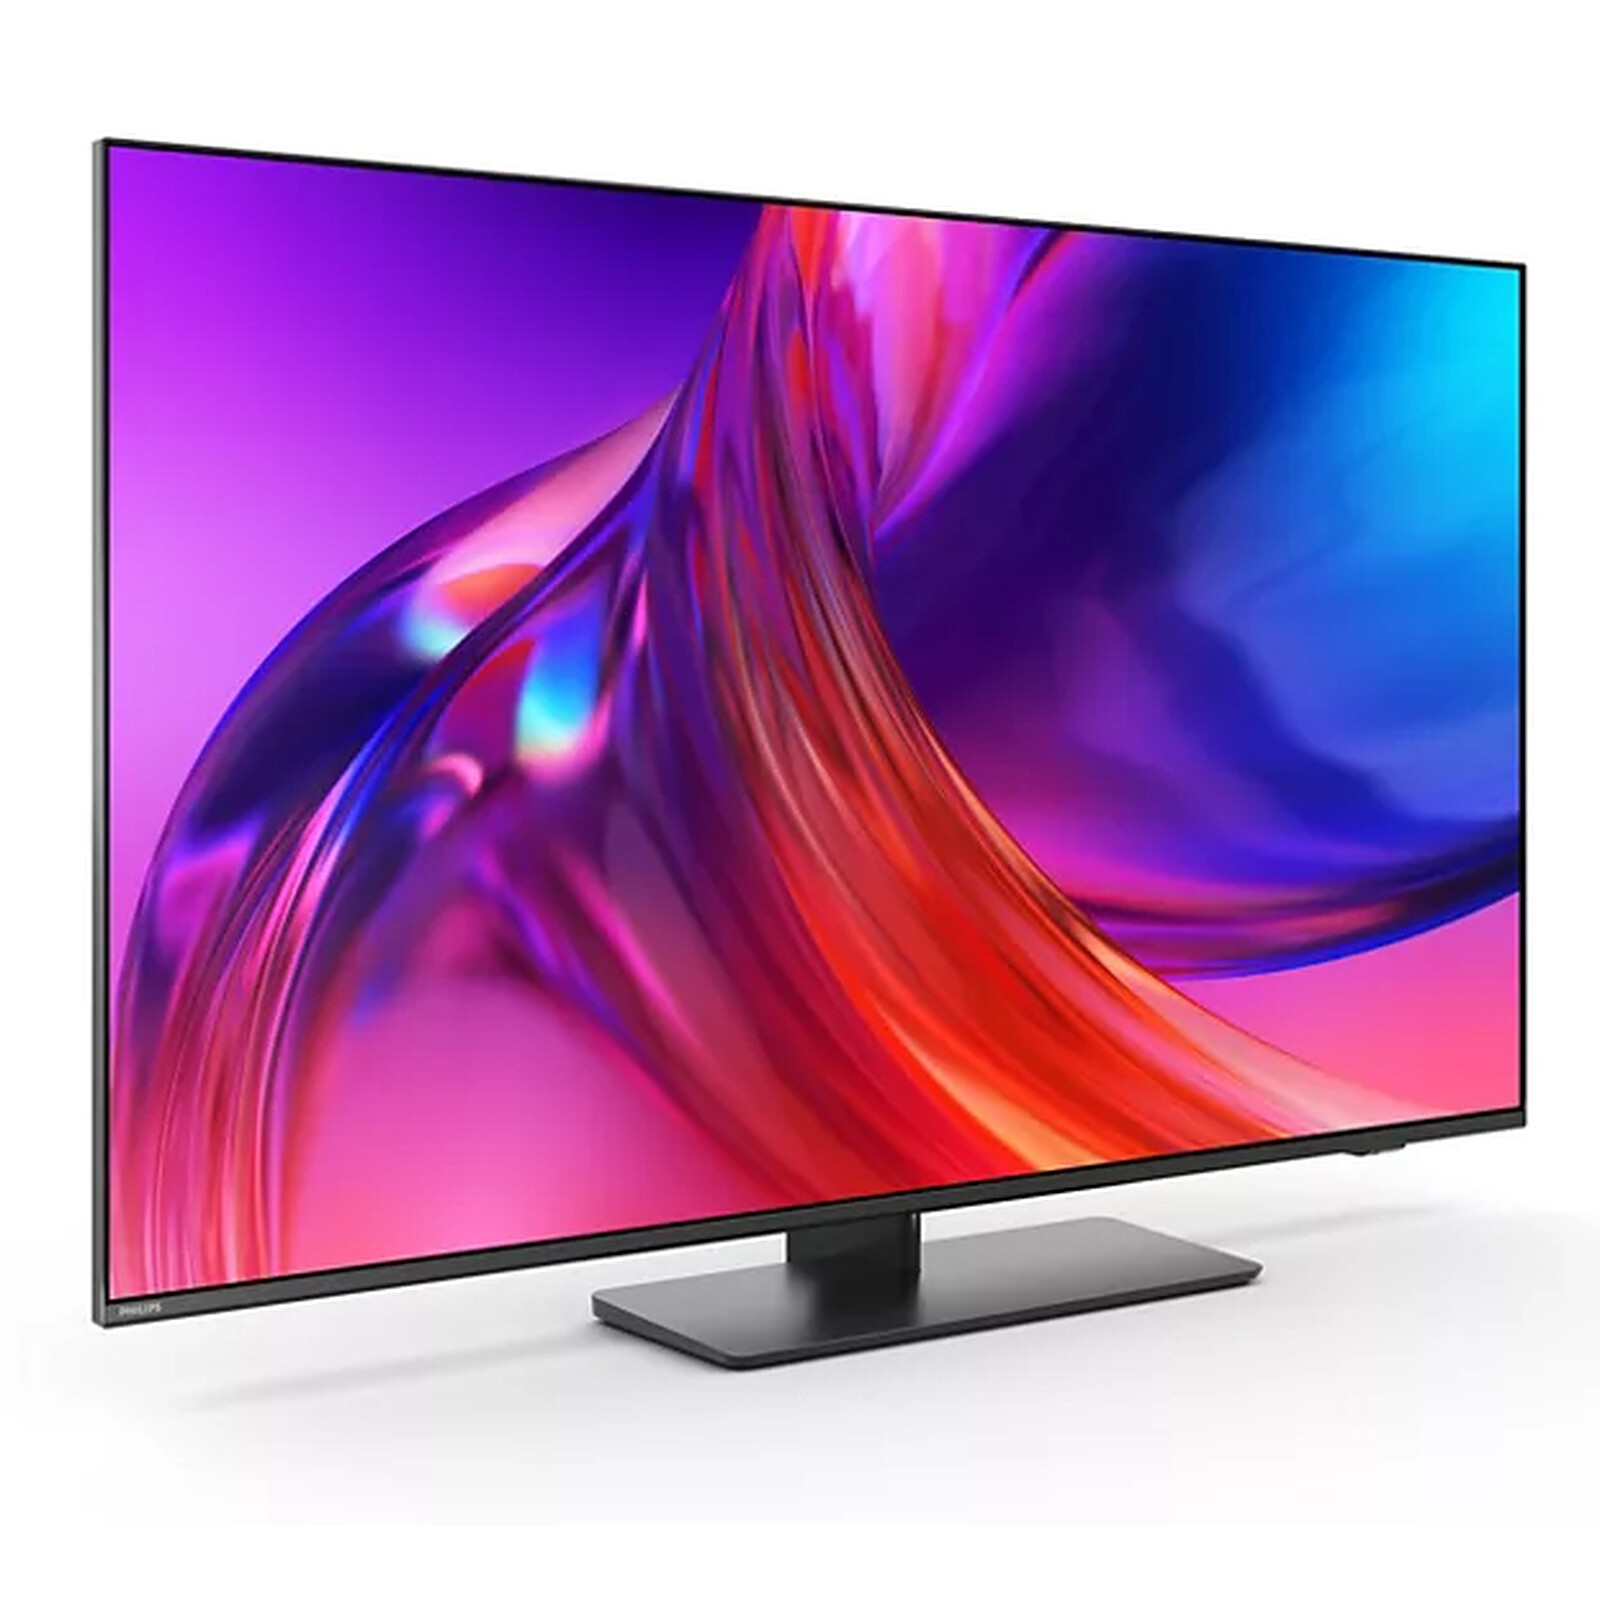 Philips - warranty One 3-year TV LDLC - The 50PUS8808/12